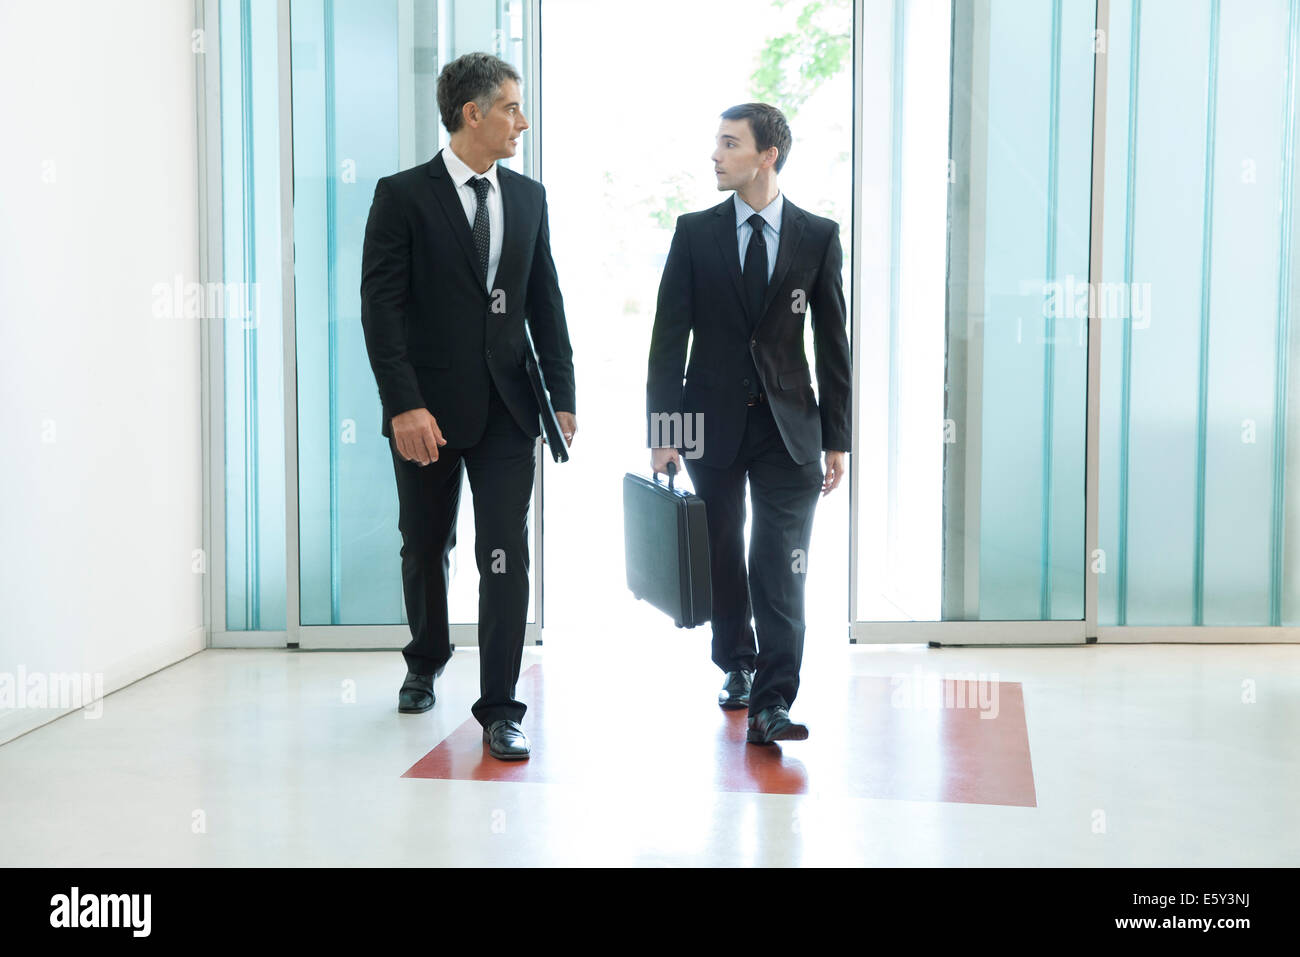 Senior business executive chatting with new associate as they enter building together Stock Photo